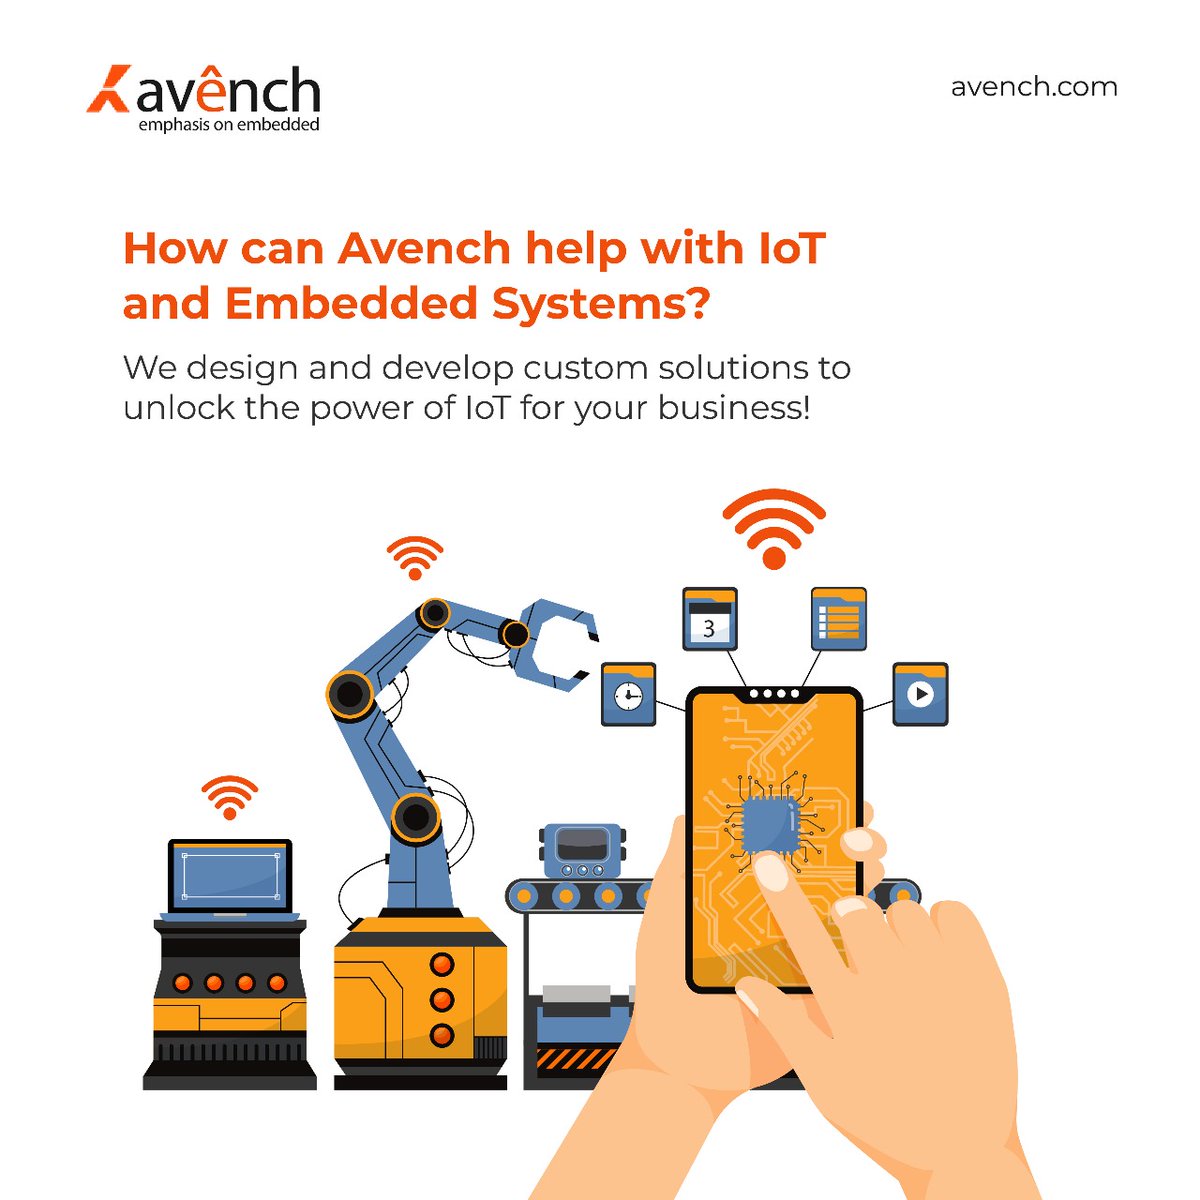 Unlock IoT potential with Avench: Firmware, cloud SDK porting, gateway design, FOTA, secure connectivity, LoRa, BLE, and Wi-Fi support. Contact us now! avench.com #avenchsystem #embeddedsystems #IOTsystem #microcontrollers #TechVision #hardwaretools